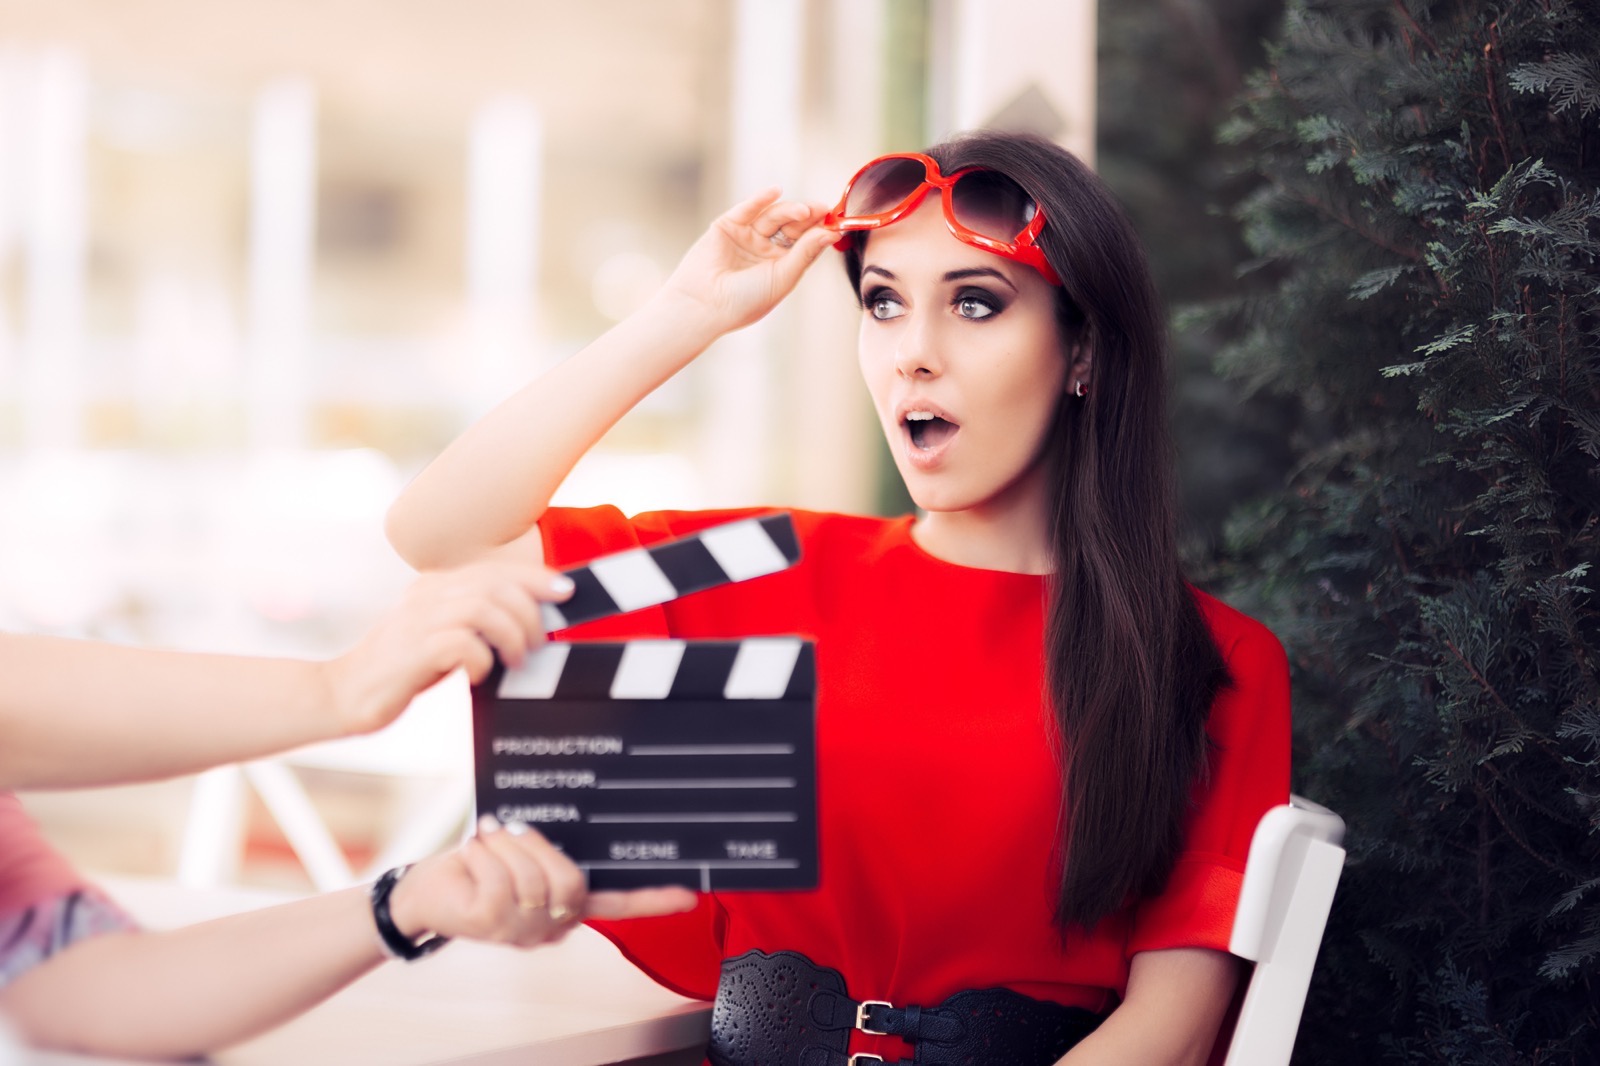 Fun Words Quiz Surprised Actress with Oversized Sunglasses Shooting Movie Scene